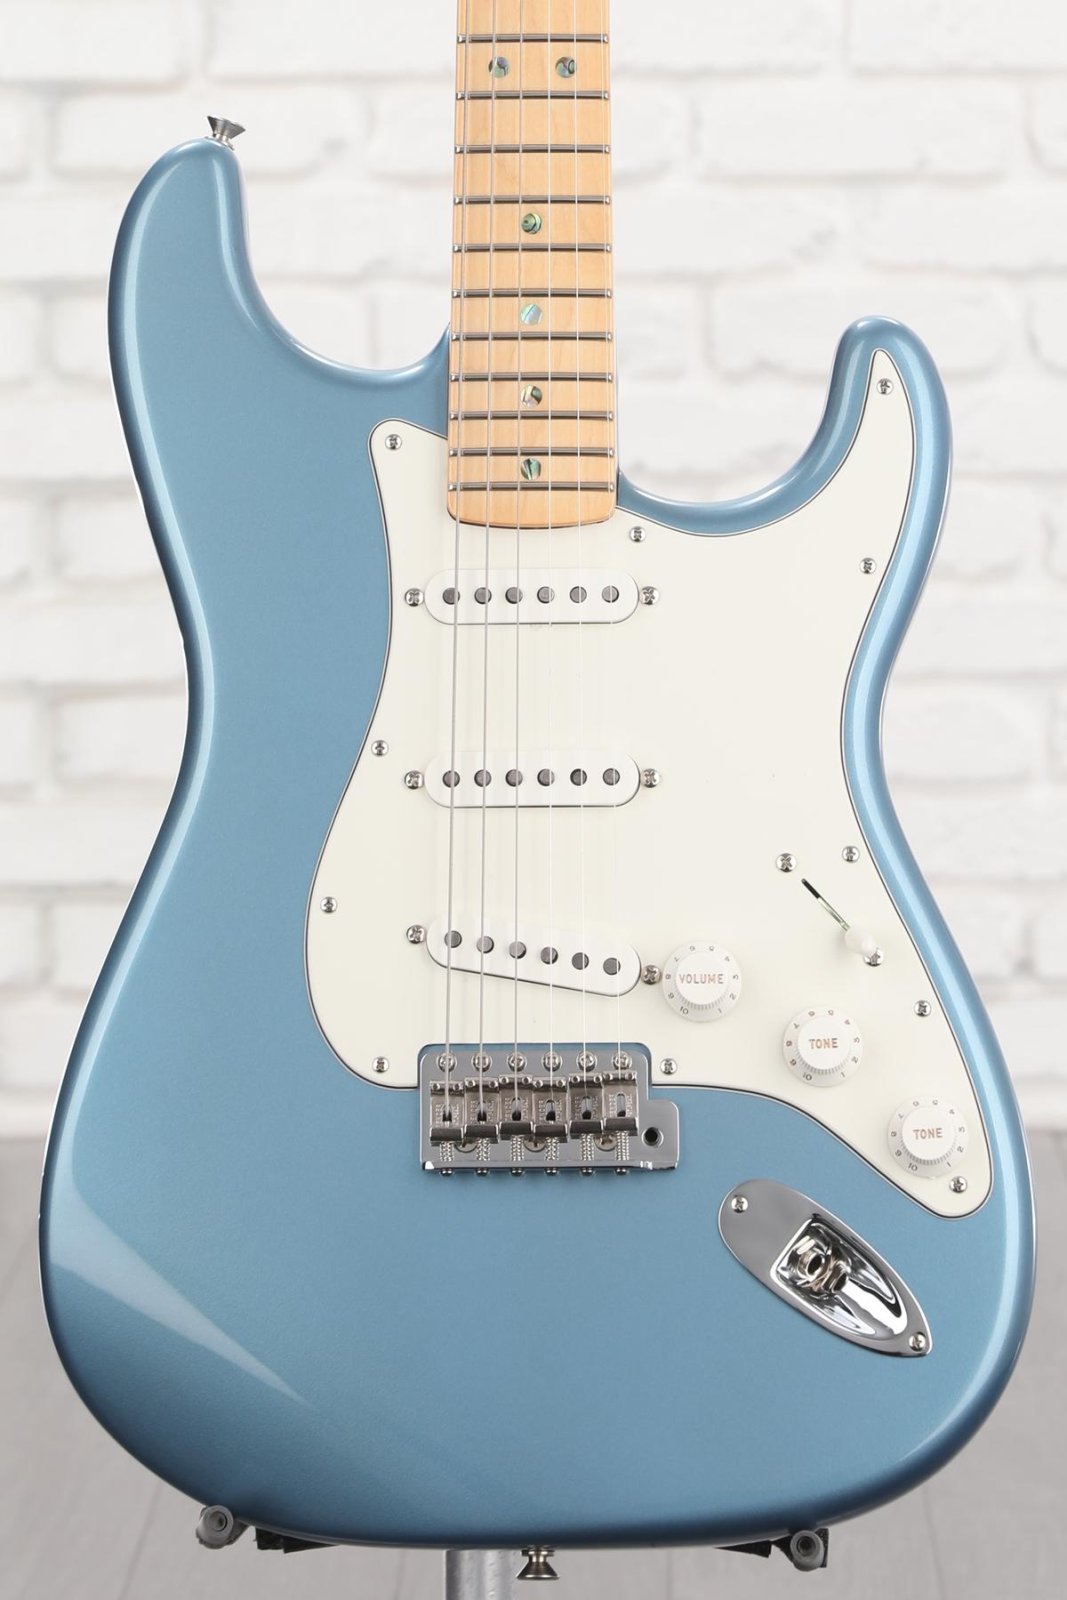 Fender　Trower　Aged　Faded　Placid　Robin　Custom　Shop　Electric　Lake　Signature　Blue　Stratocaster　Guitar